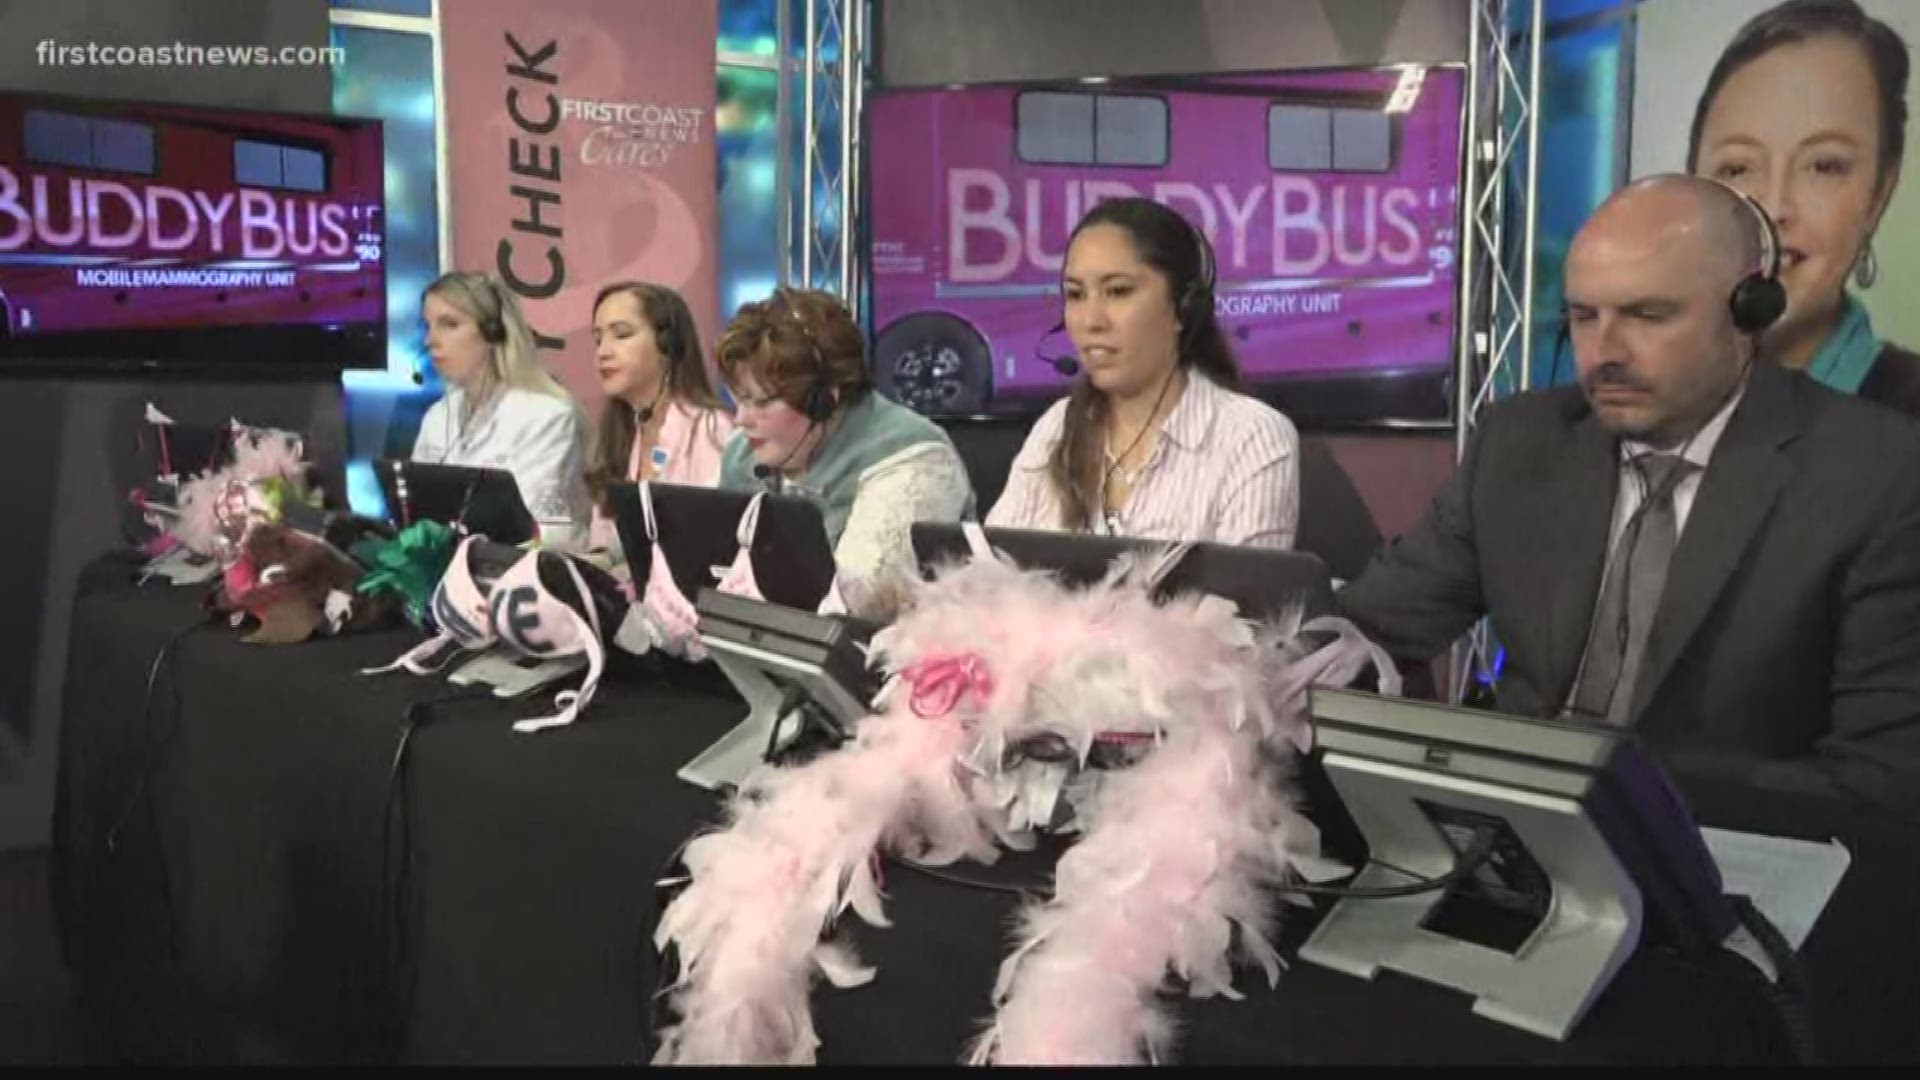 GMJ anchor Lew Turner promised to eat a whole jalepeño if the Buddy Bus telethon raised $2,000 in 15 minutes. They raised $4,000.